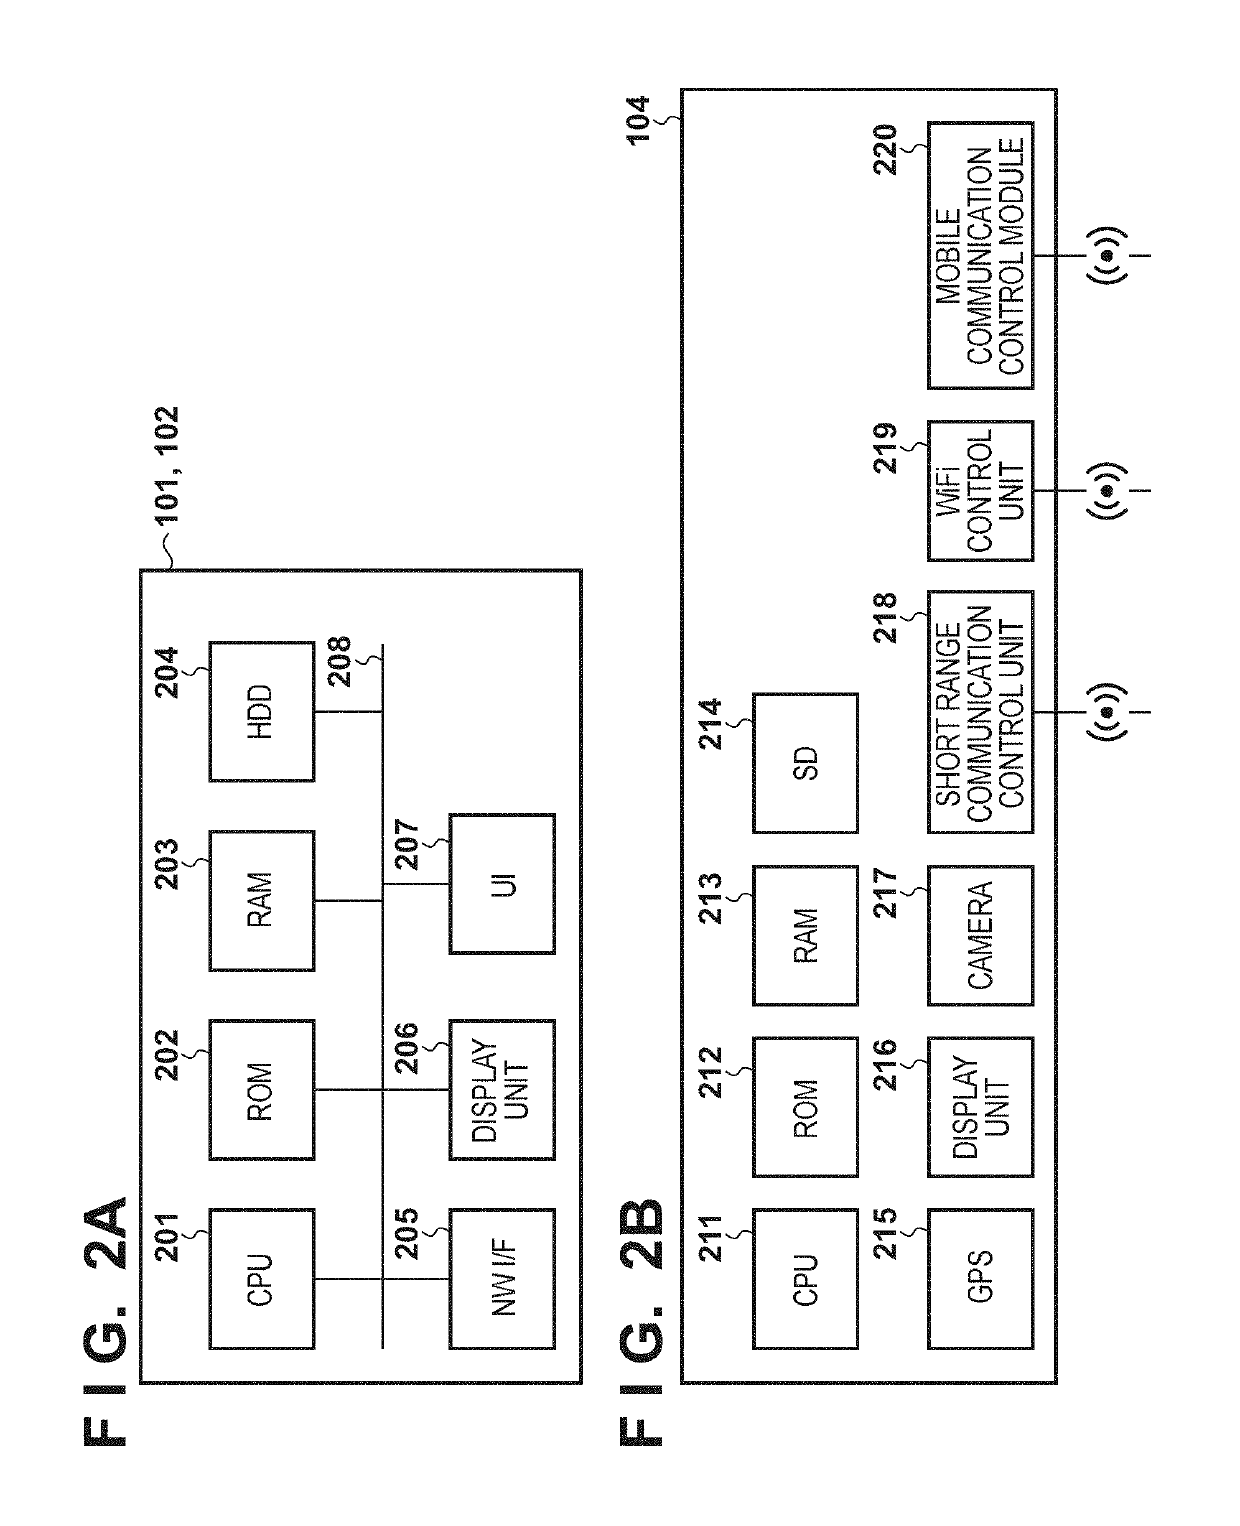 Printing system and method of controlling printing system that allow a user of a mobile terminal to print to an image forming apparatus using the mobile terminal, and a service provider to charge the user for printing